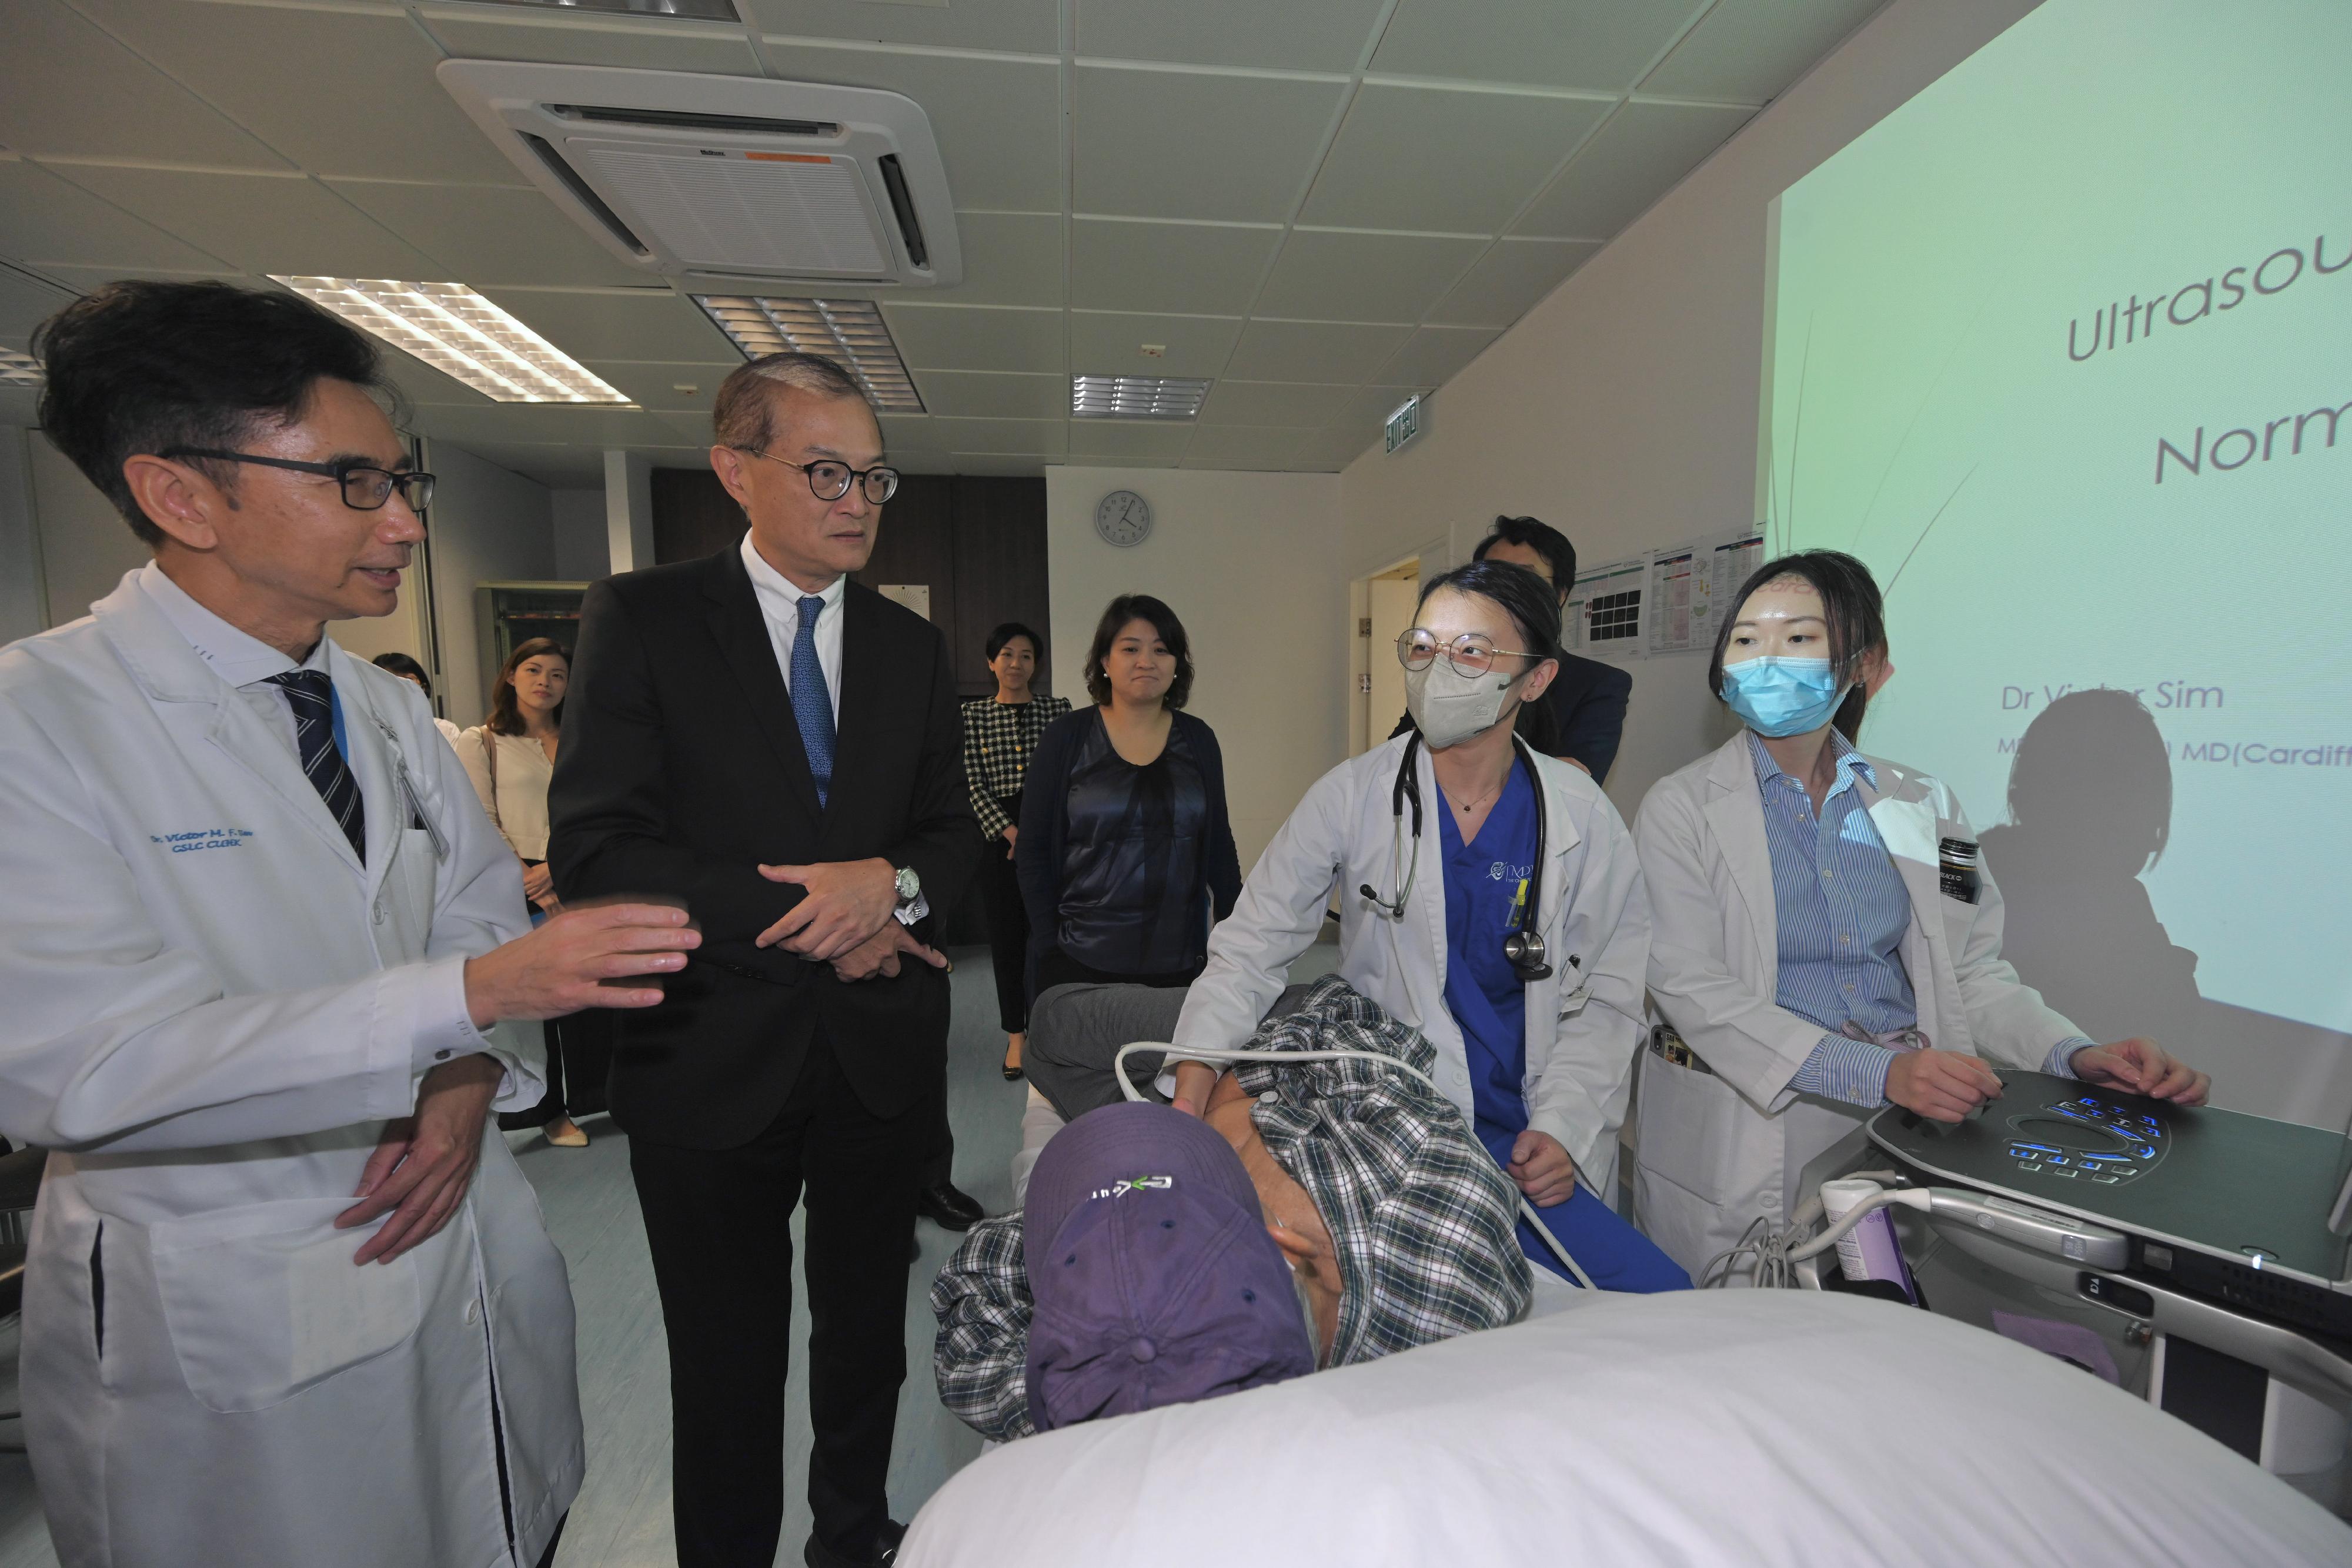 The Secretary for Health, Professor Lo Chung-mau, visited the Faculty of Medicine of the Chinese University of Hong Kong today (September 21). Photo shows Professor Lo (second left) and the Under Secretary for Health, Dr Libby Lee (third right), visiting the Kai Chong Tong Clinical Skills Learning Centre situated at Prince of Wales Hospital to get a better grasp of clinical skills teaching.